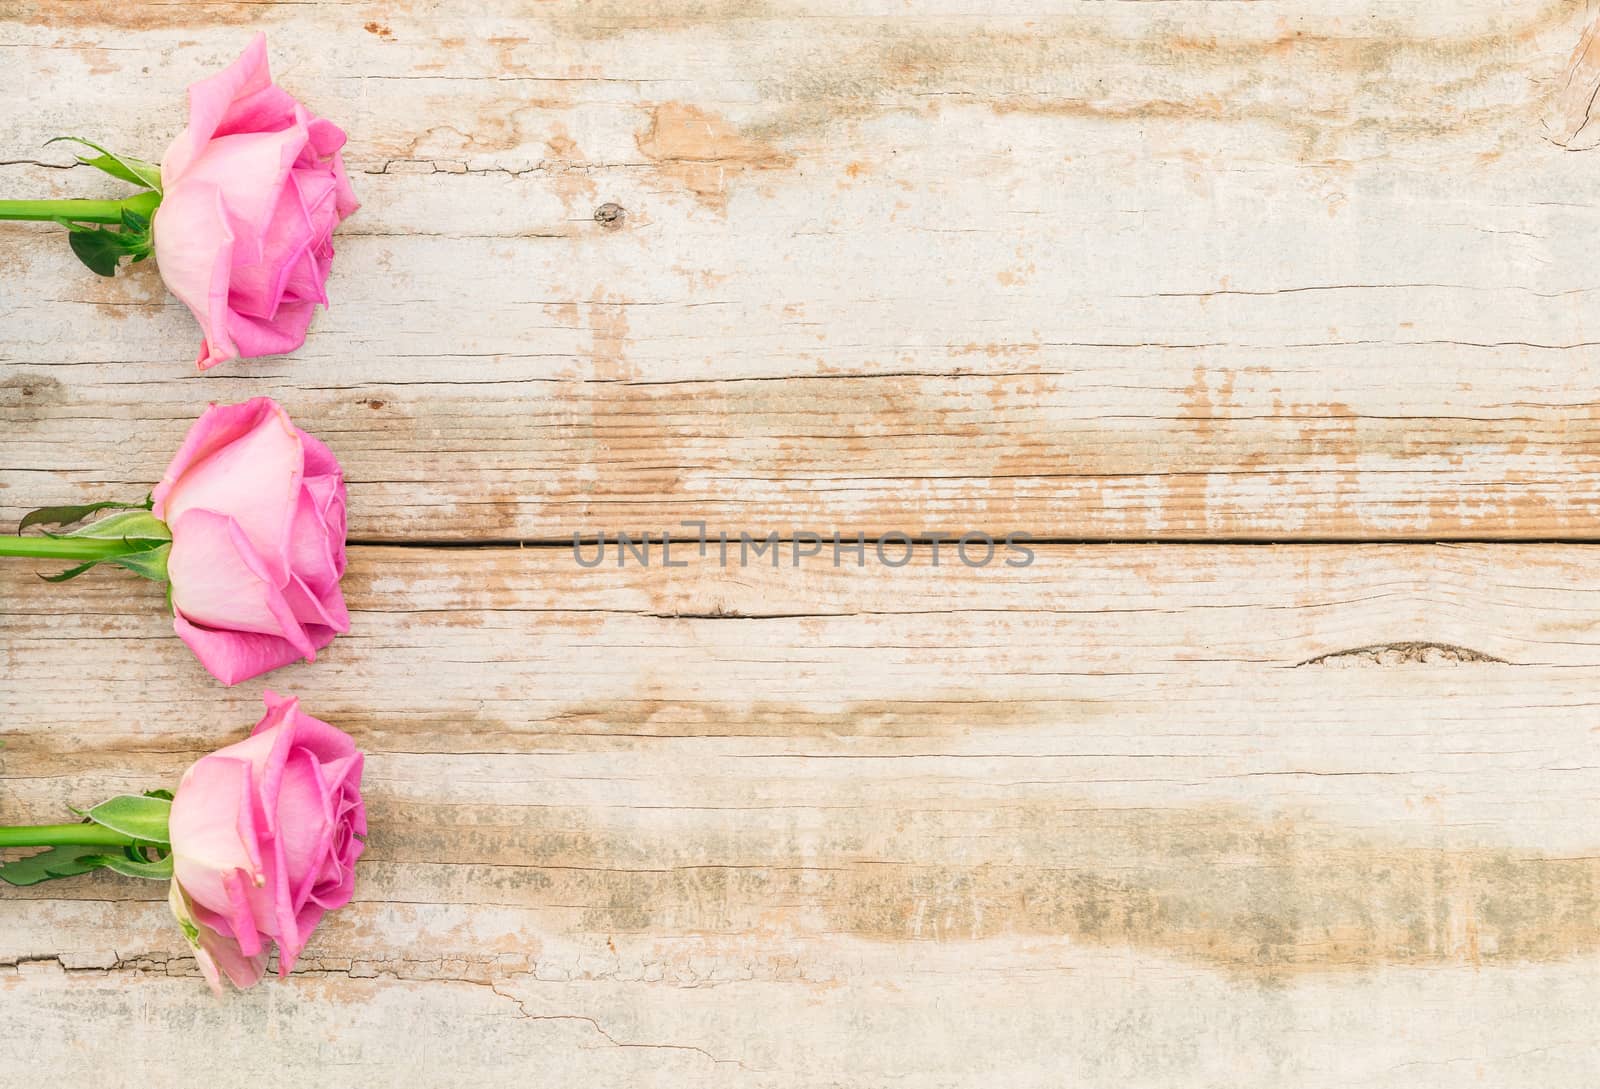 Rustic wooden background with fresh pink roses by Vulcano